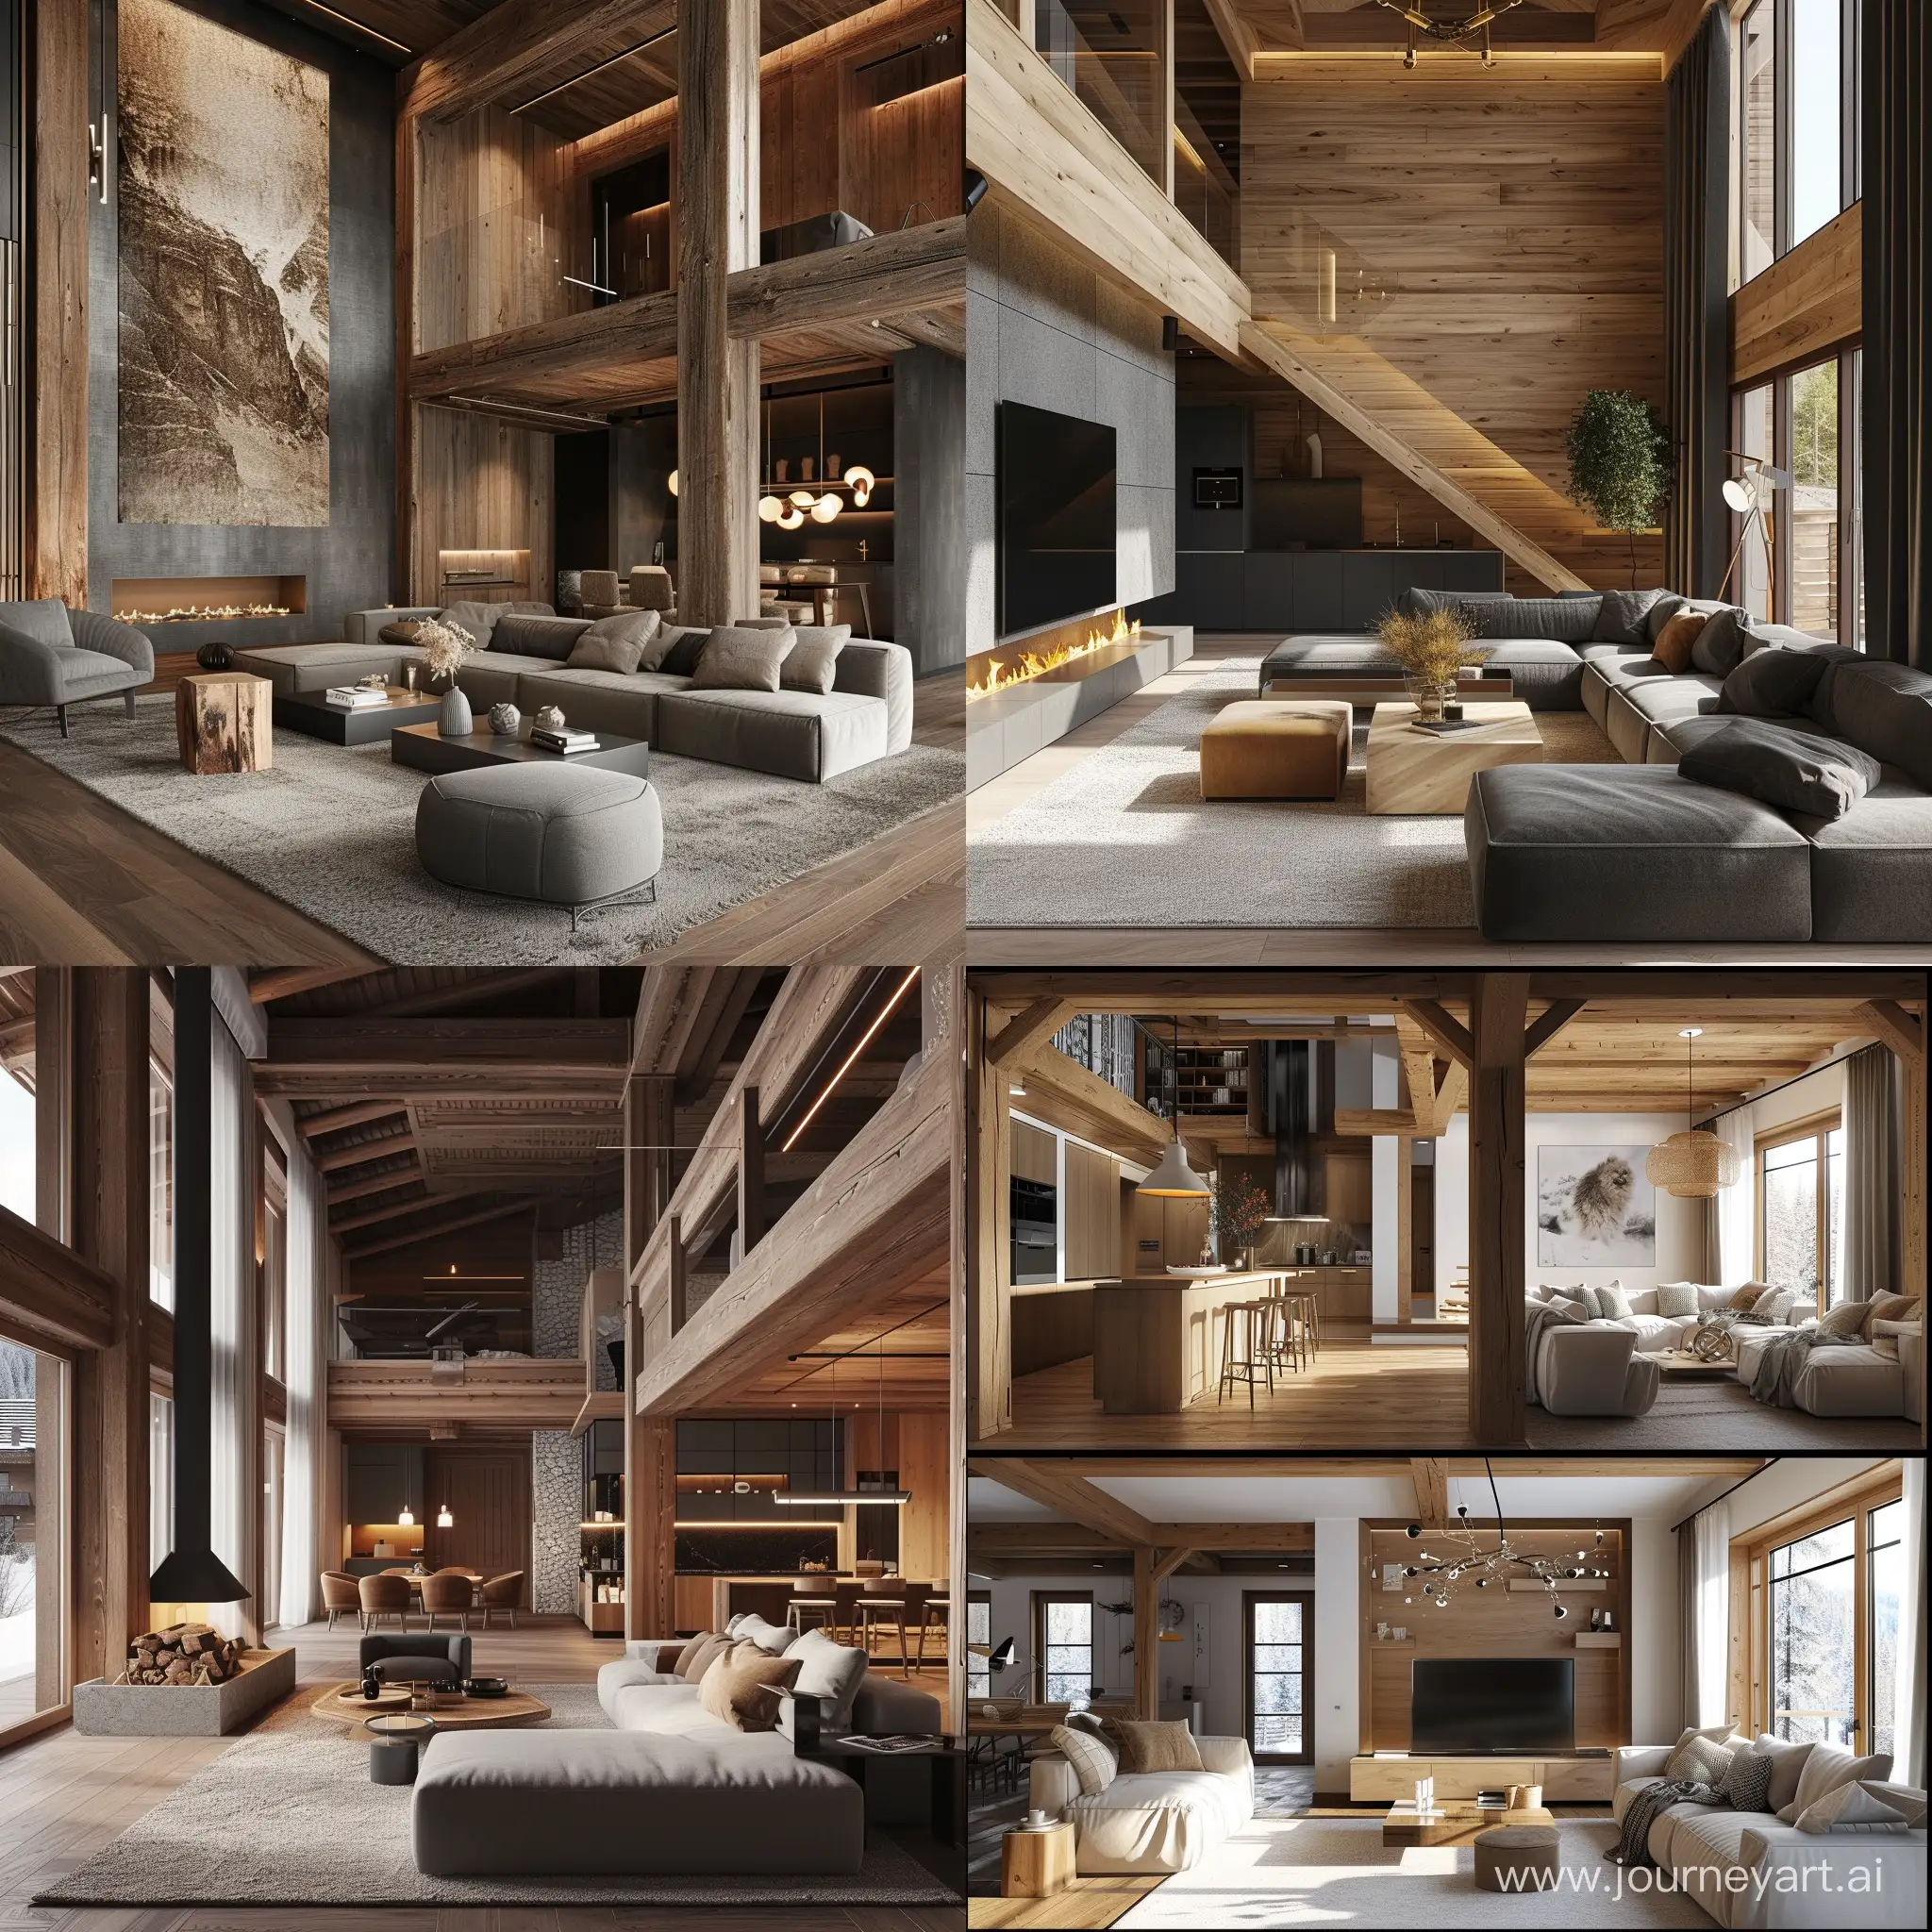 Contemporary-Chalet-Interior-Design-with-a-Cozy-Vibe